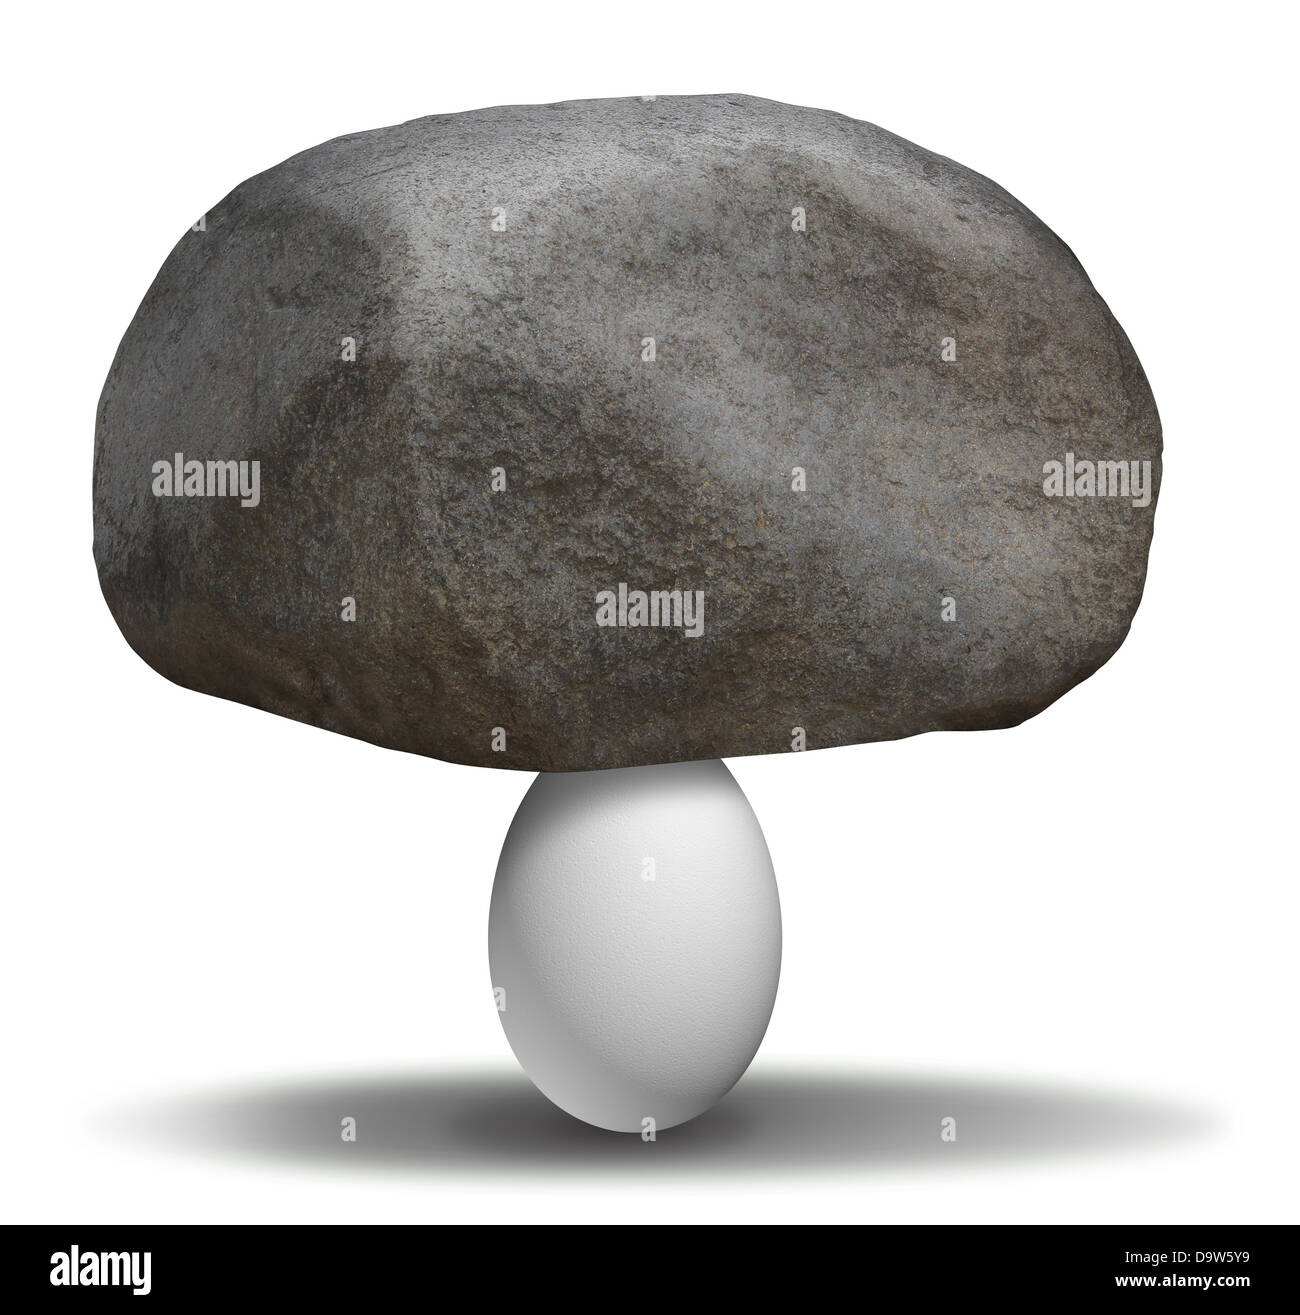 Extraordinary strength with a heavy rock boulder on top of a fragile white egg as a concept of possibilities and belief in ability to achieve what is impossible to possible. Stock Photo